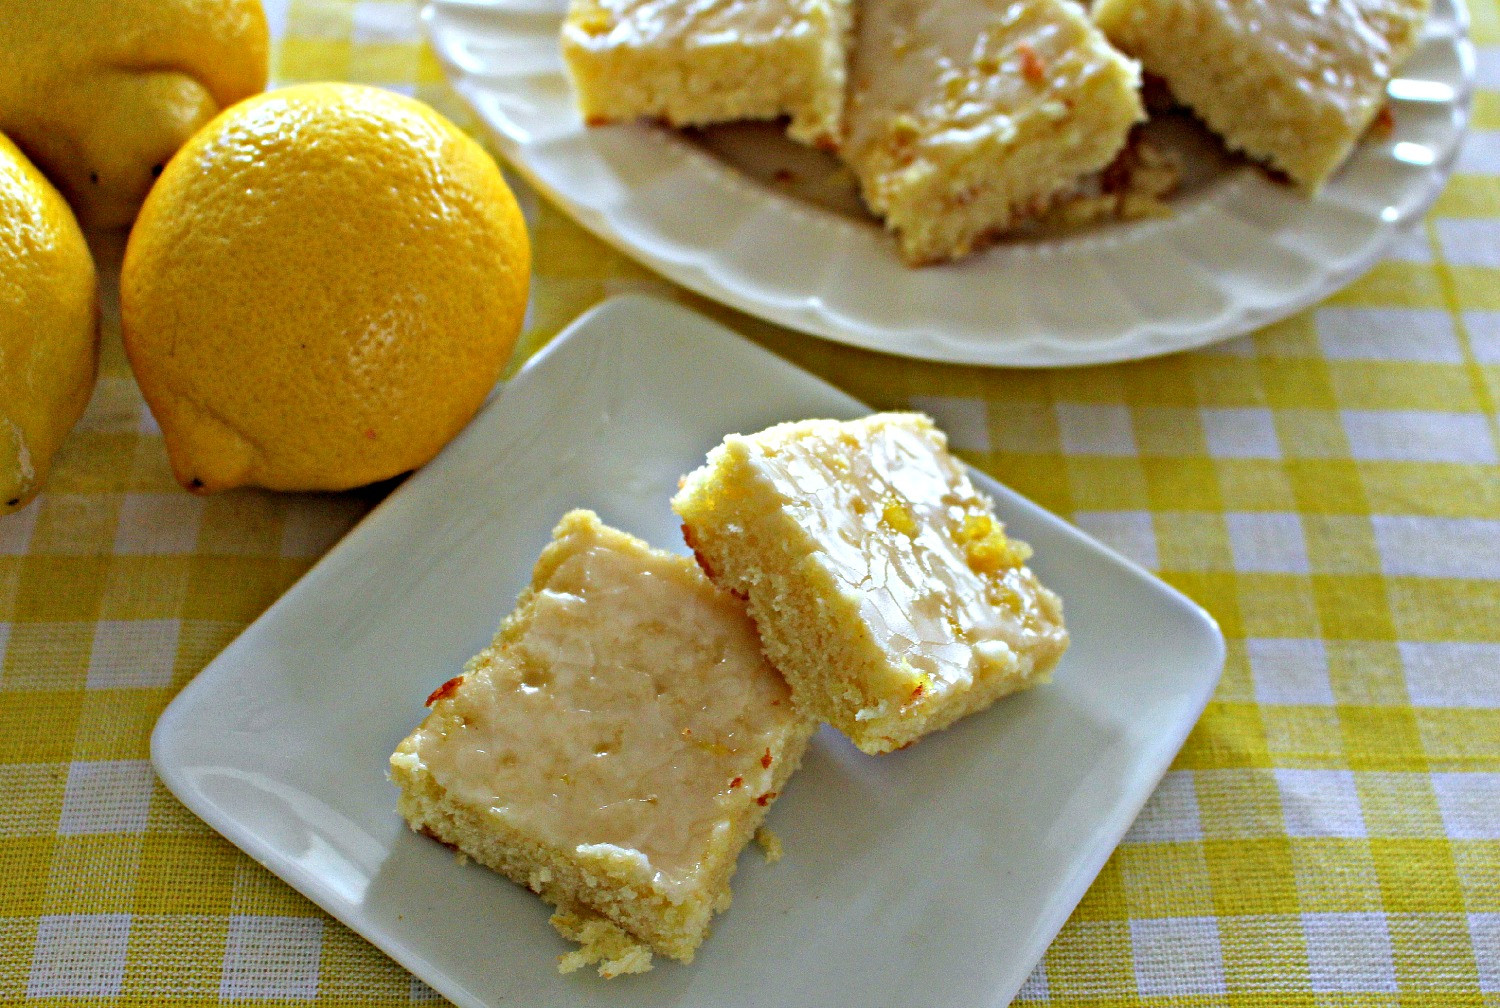 Picnic Desserts For Hot Weather
 Top 10 Family Favorite Picnic Desserts